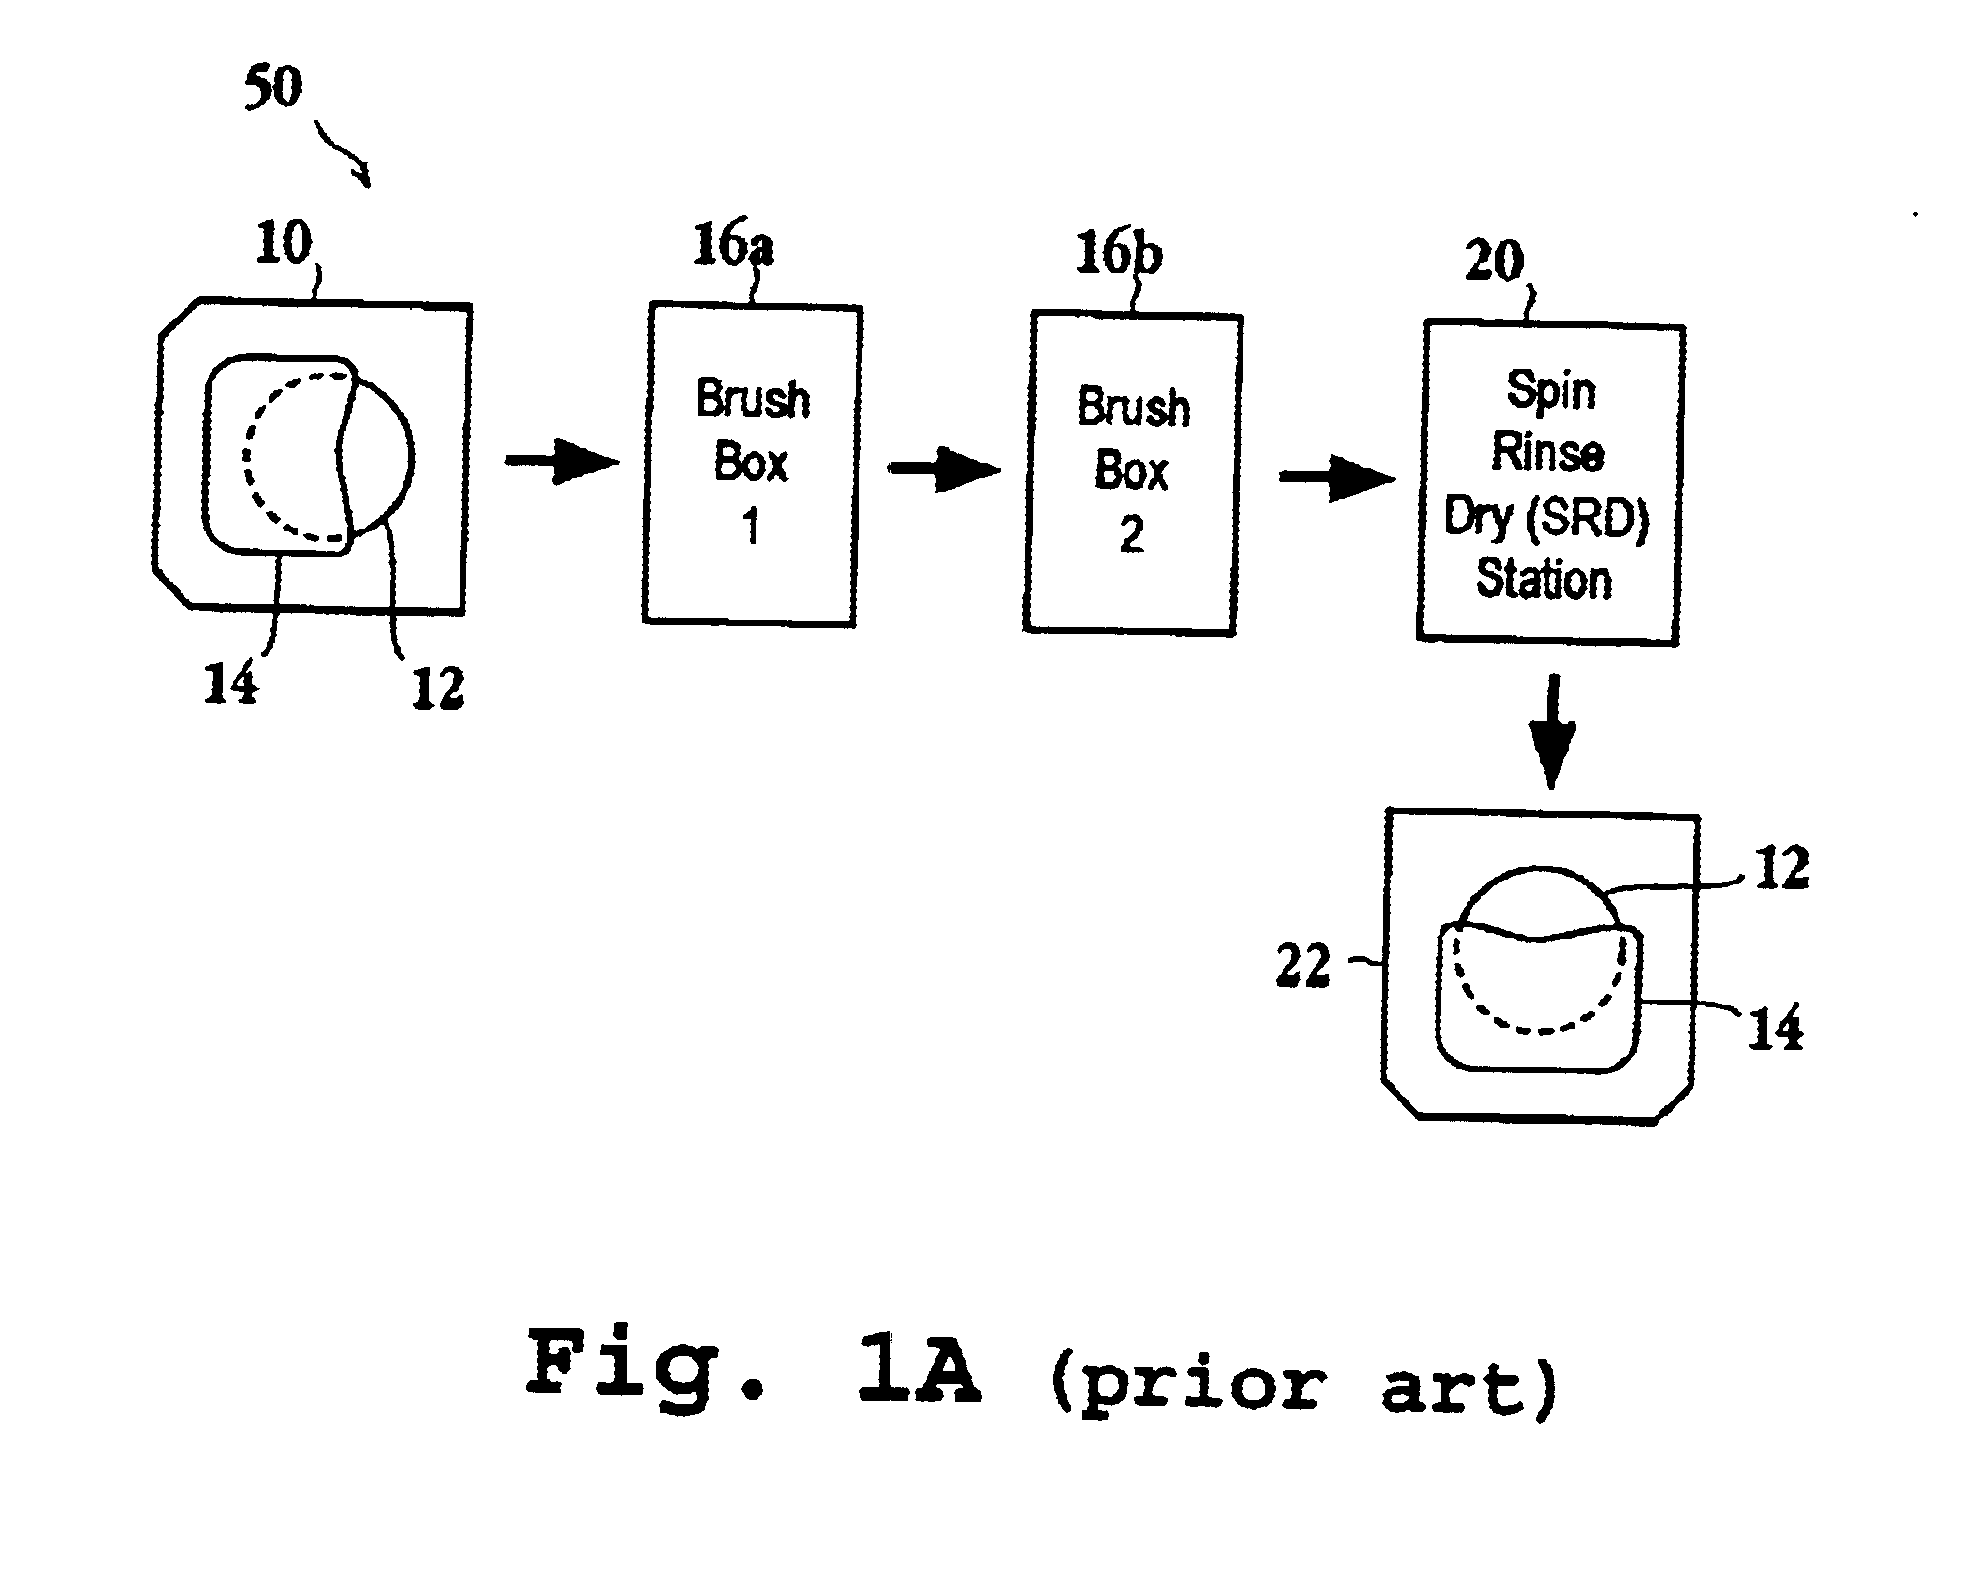 Wafer bevel edge cleaning system and apparatus